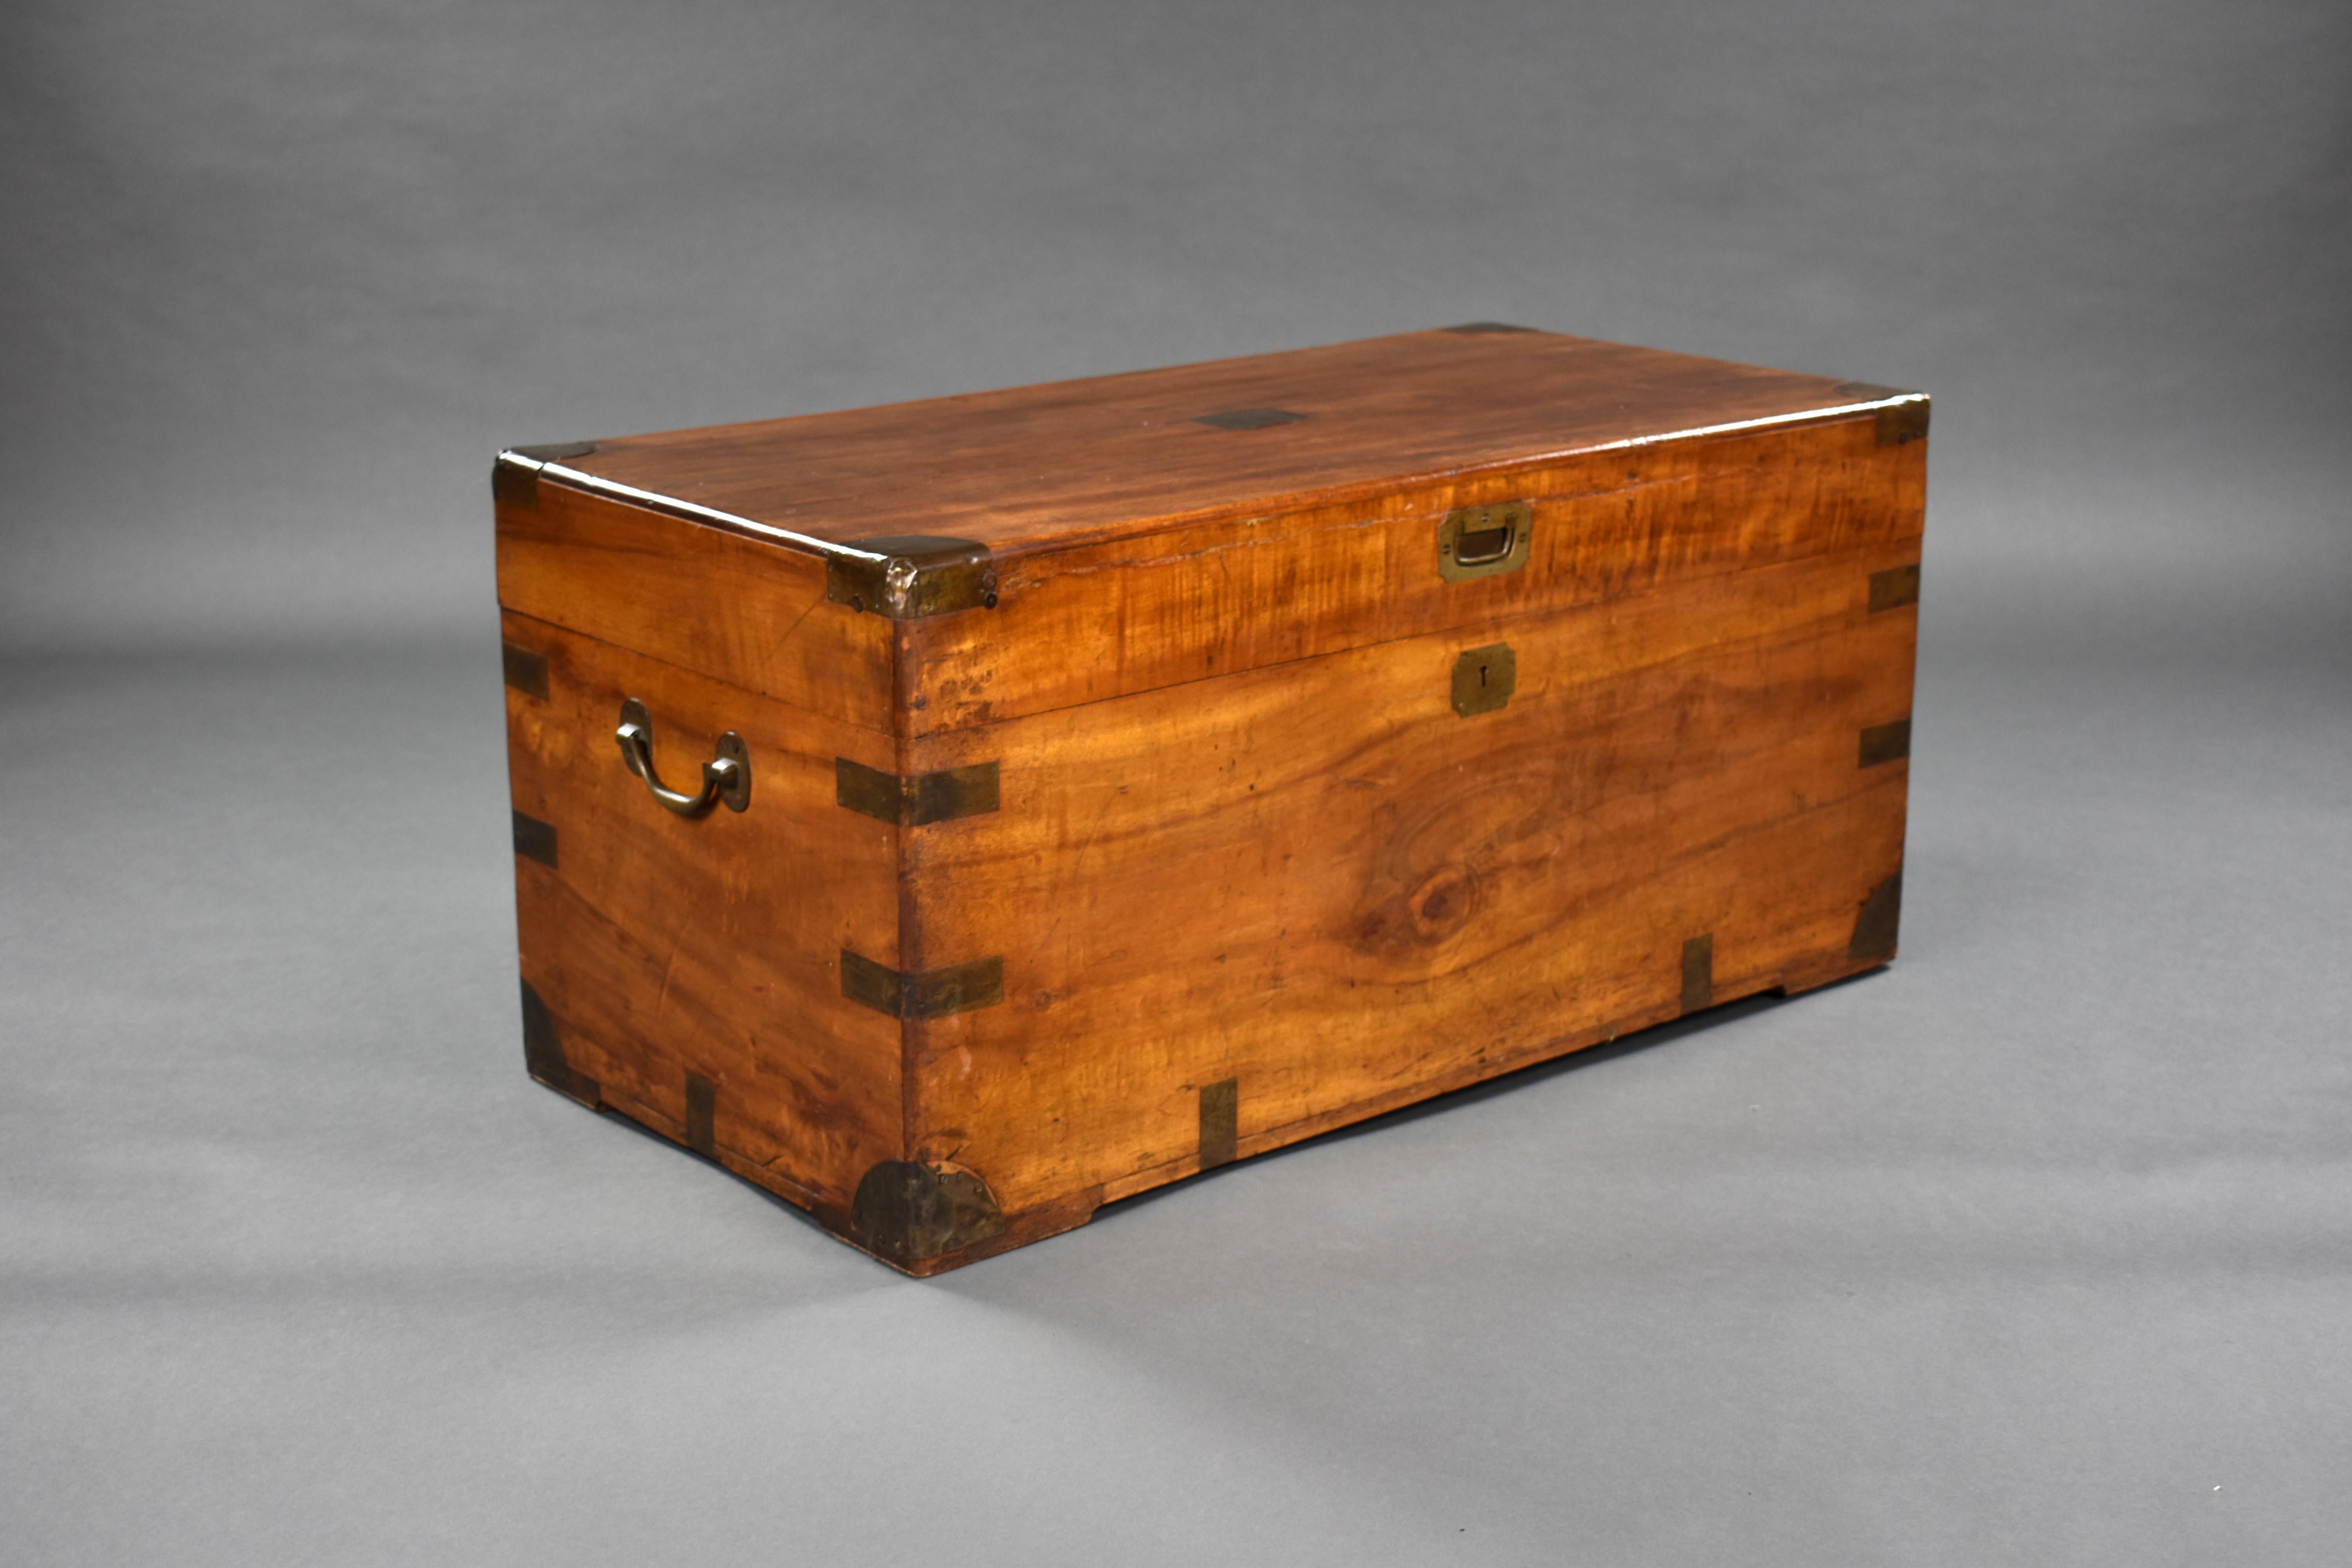 For sale is a good quality Victorian camphor wood trunk, having brass straps and corners. The hinged lid opening to reveal ample storage space. The trunk is complete with its original carrying handles and remains in very good condition, showing